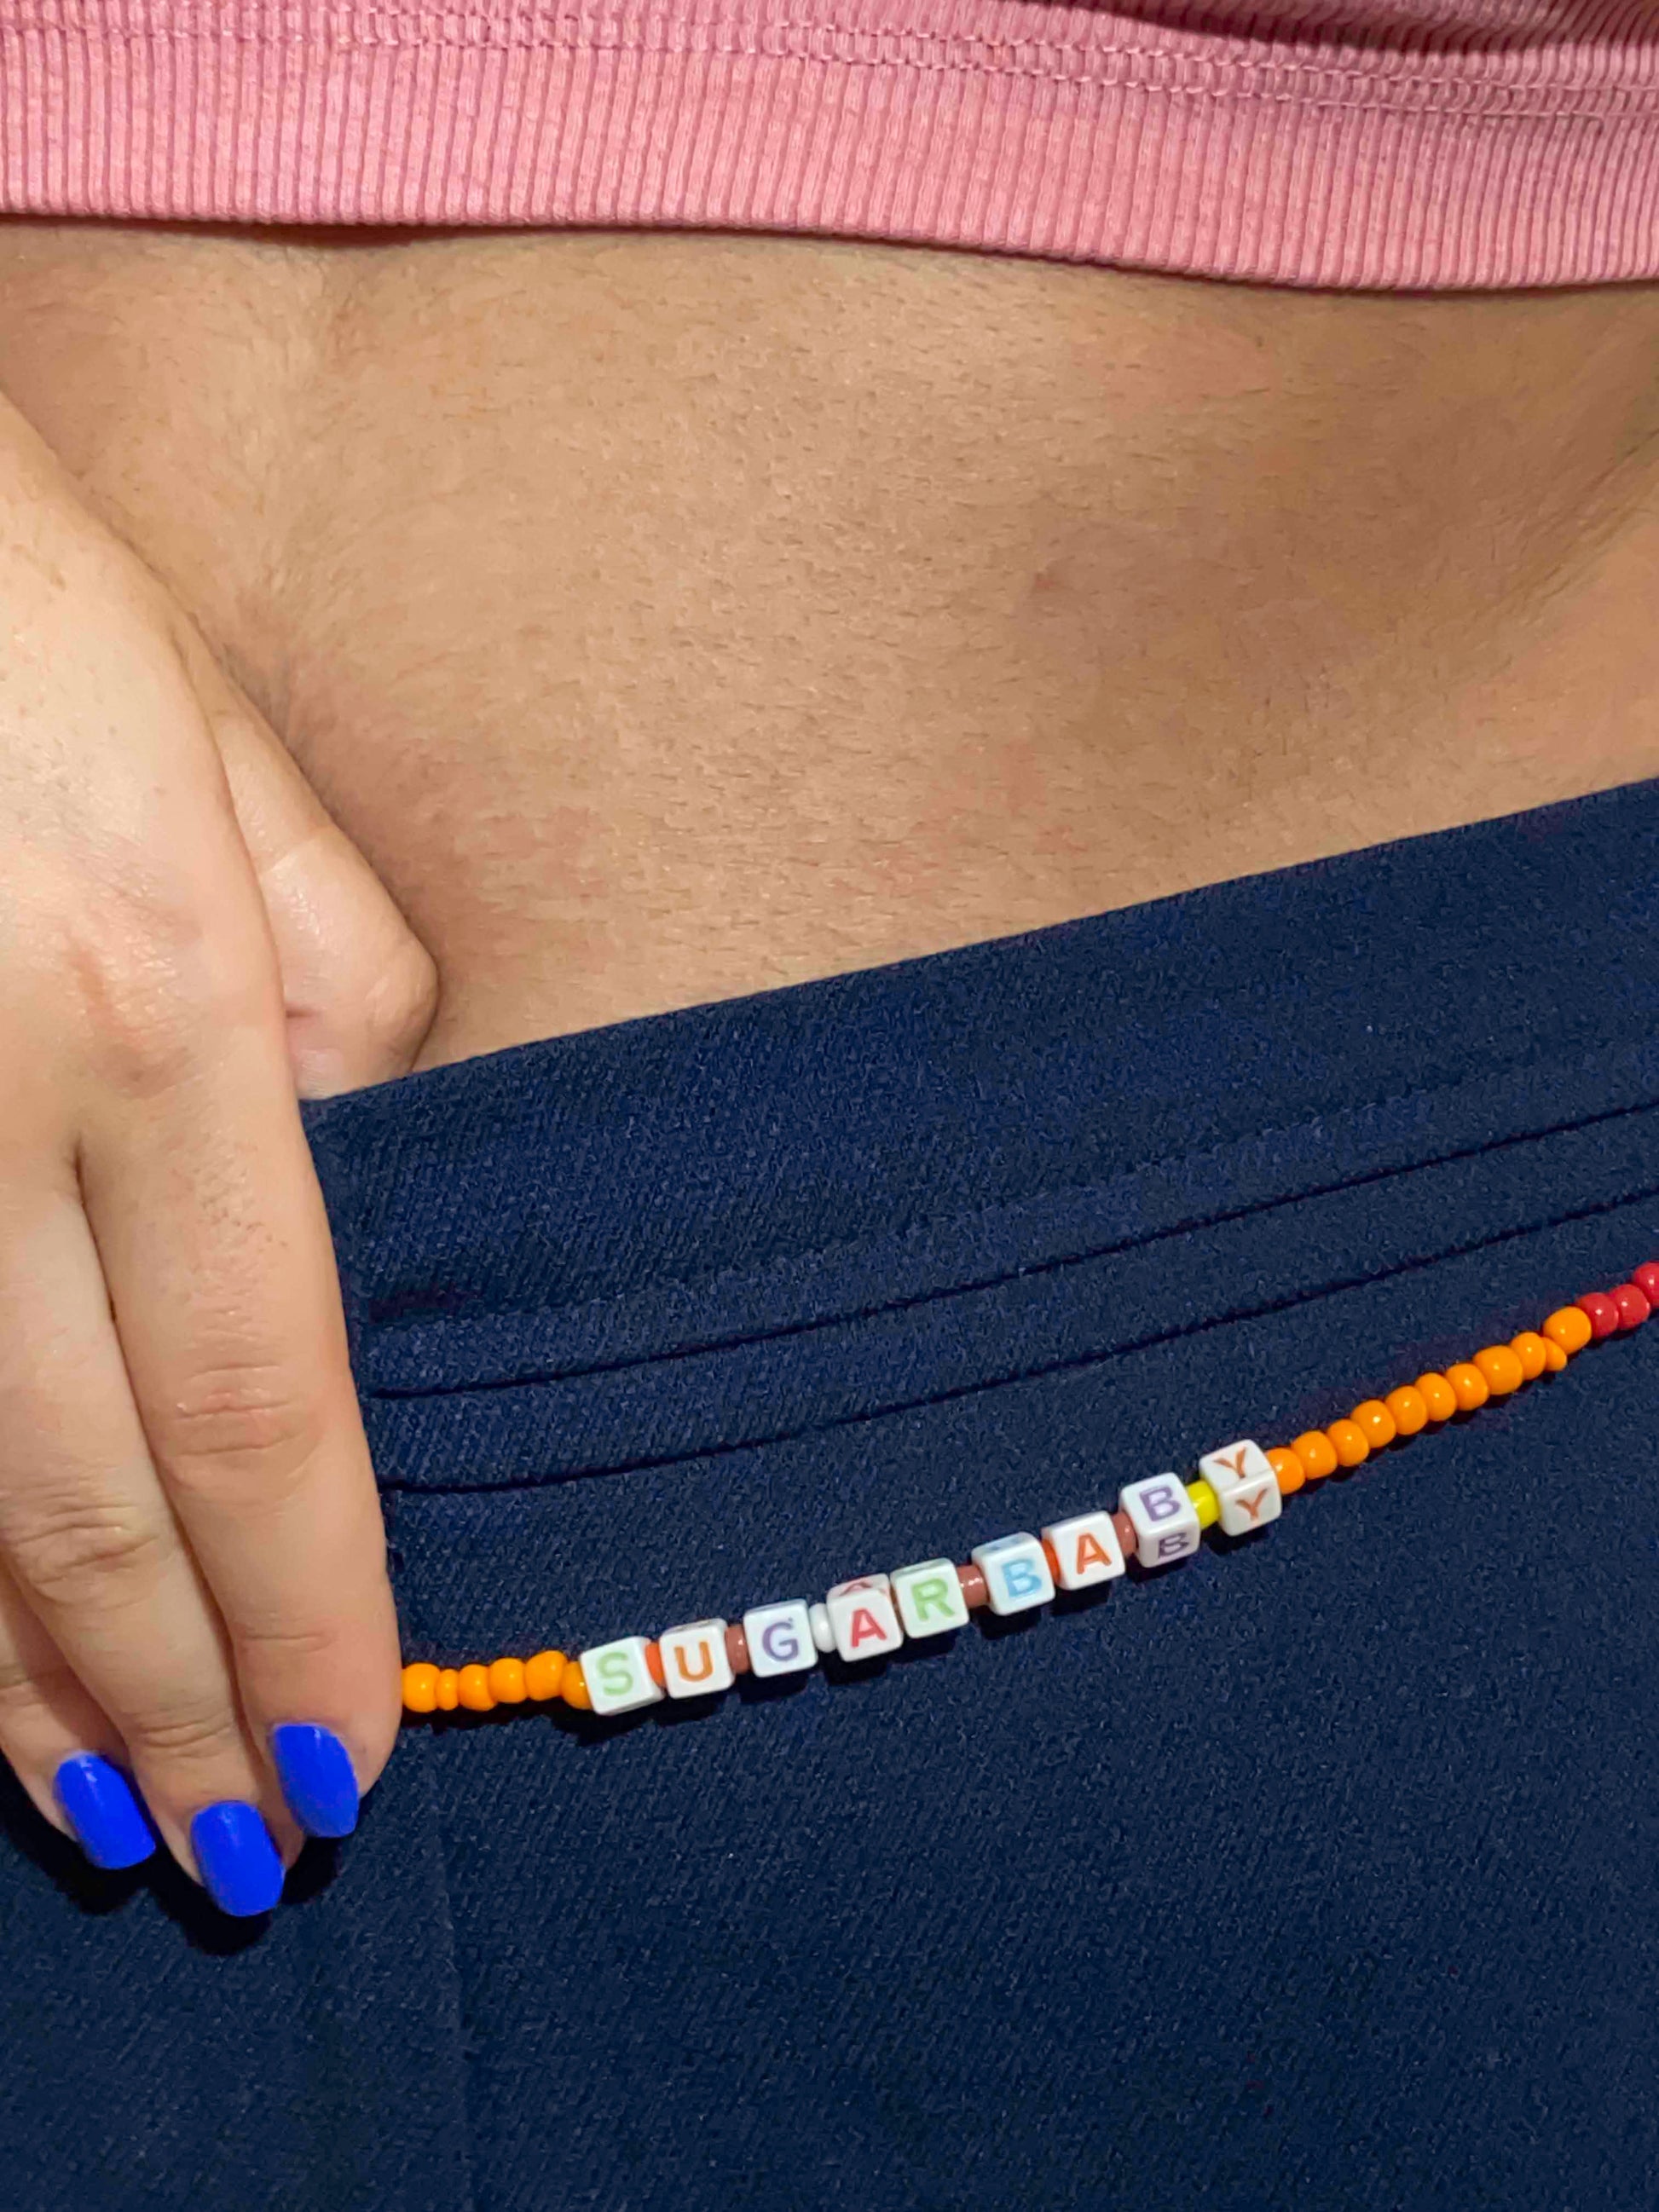 handcrafted orange, red, brown and white beaded belly chain with starfish charms and beaded letters.